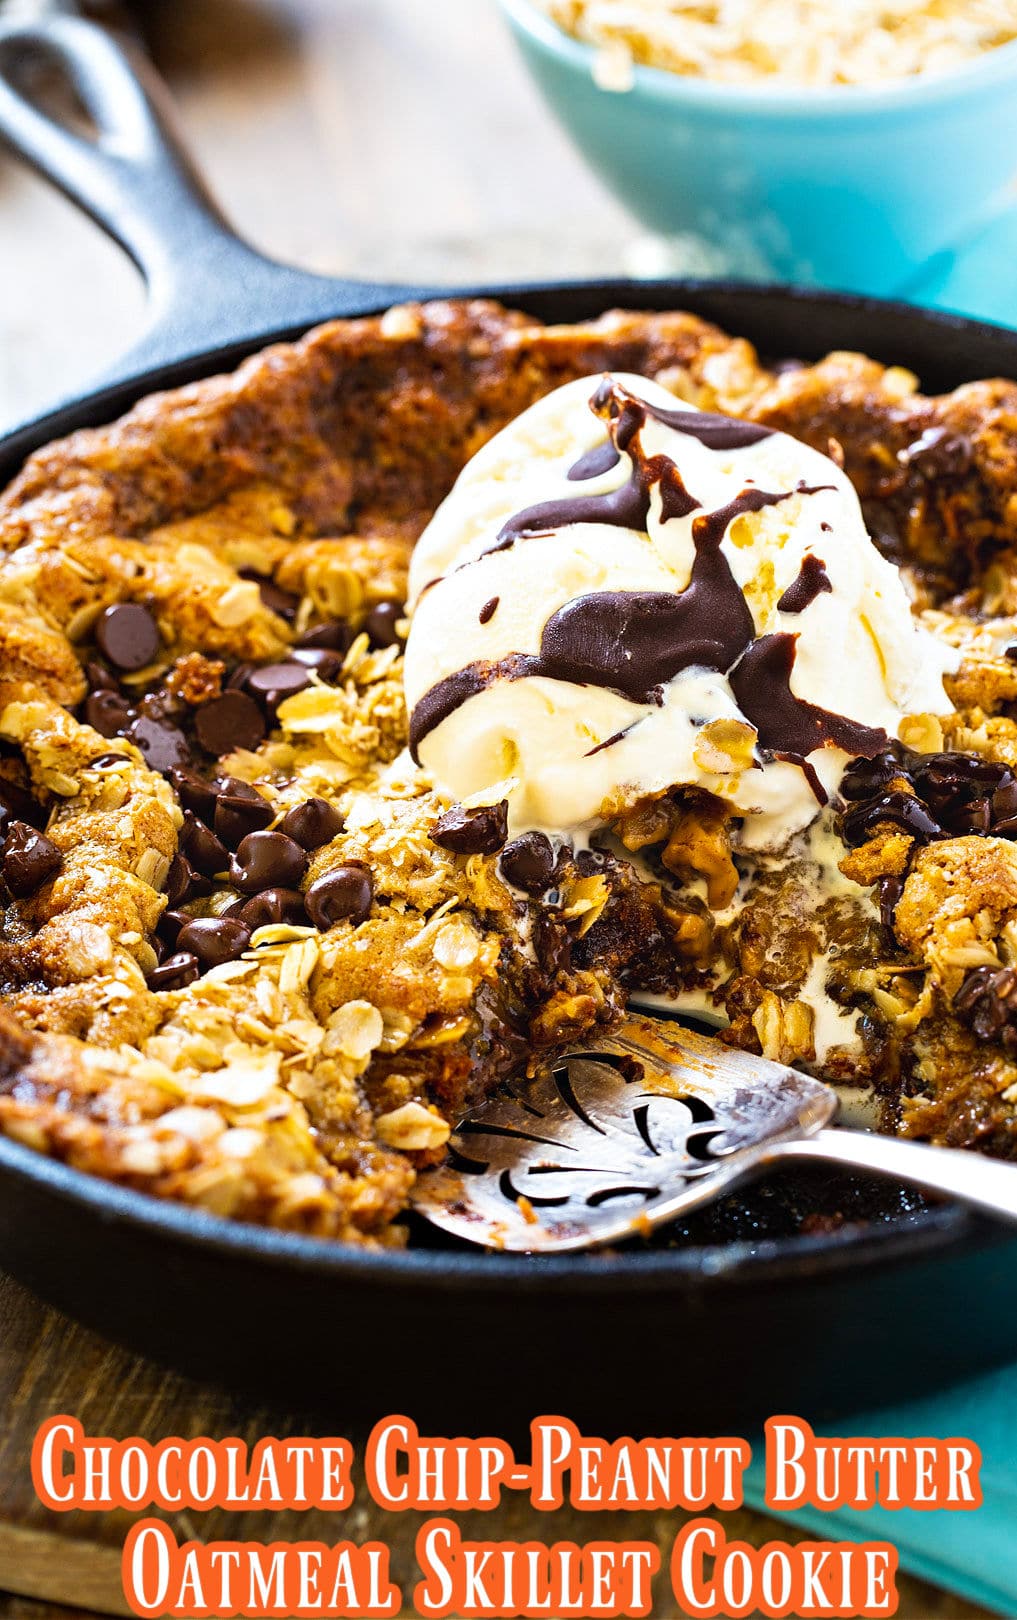 Chocolate Chip-Peanut Butter Oatmeal Skillet Cookie with a slice removed.